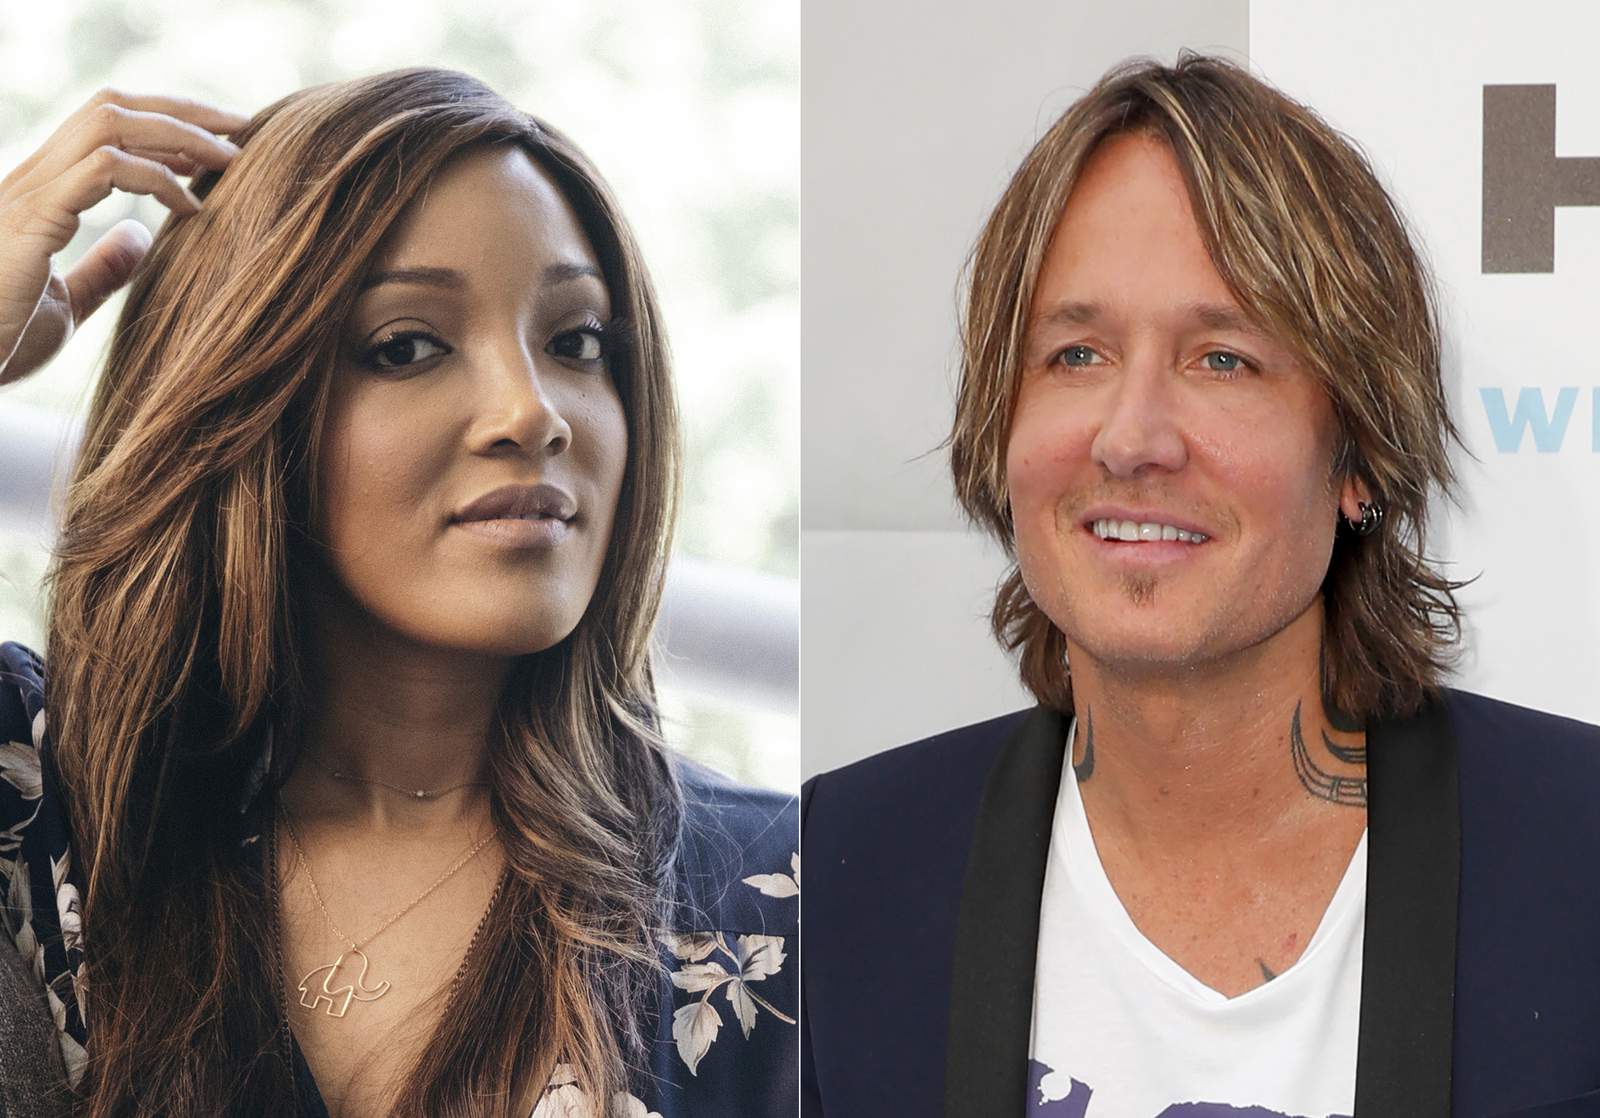 Keith Urban, Mickey Guyton have chemistry as ACM hosts